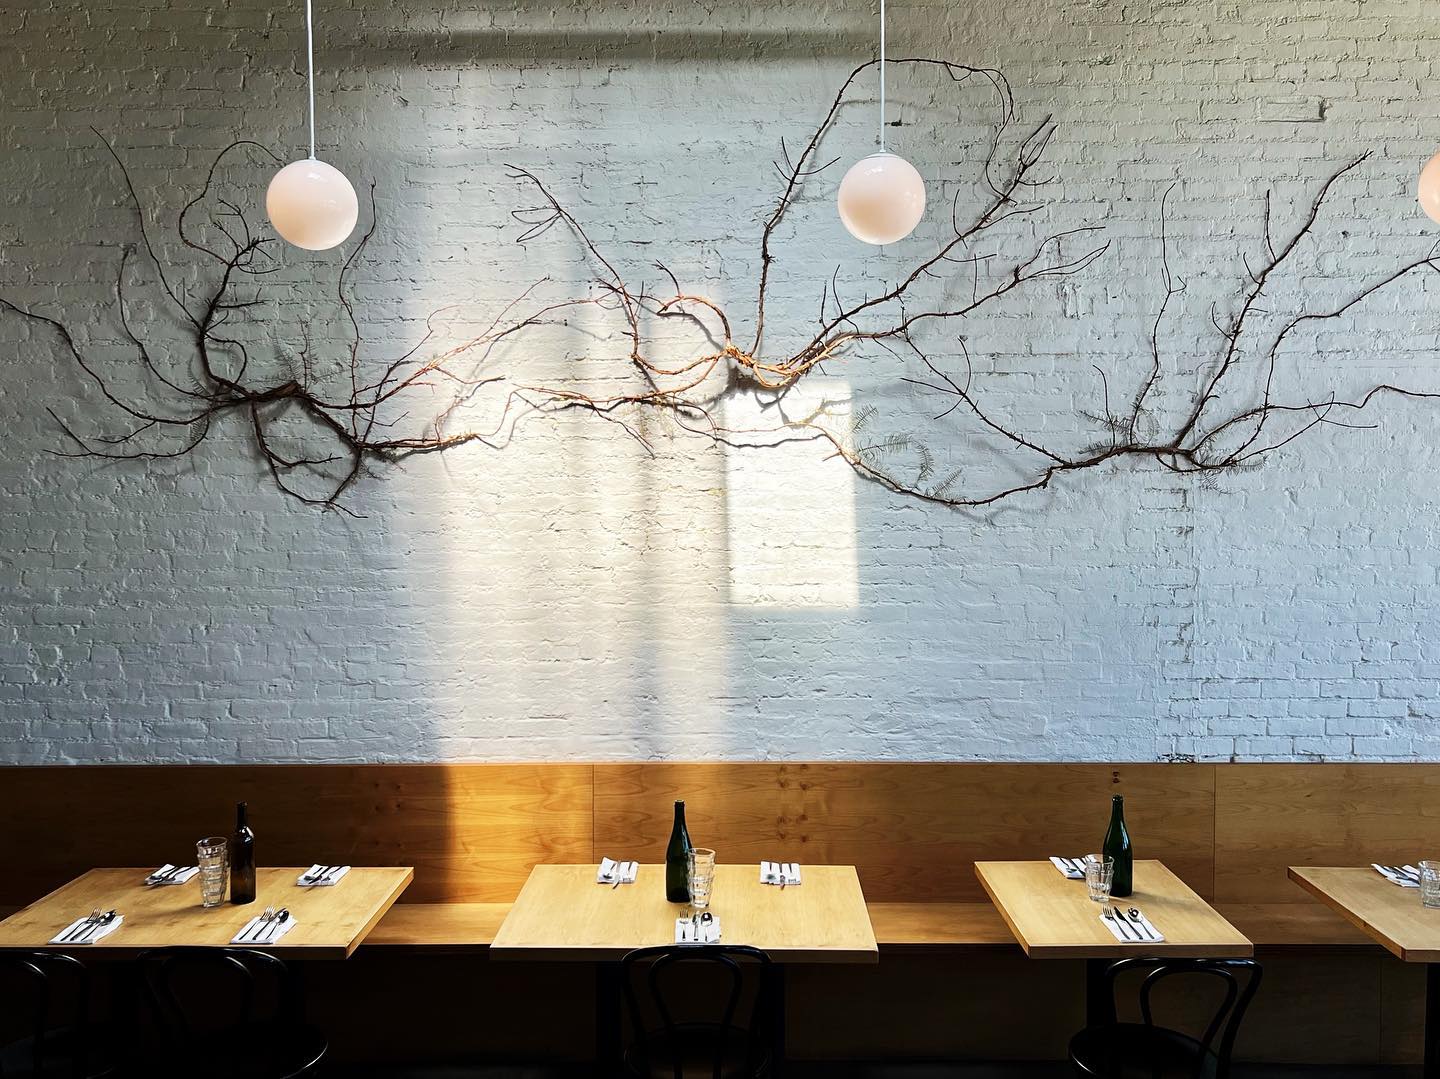 Rustic brick restaurant interior with modern lighting and hanging dried branches